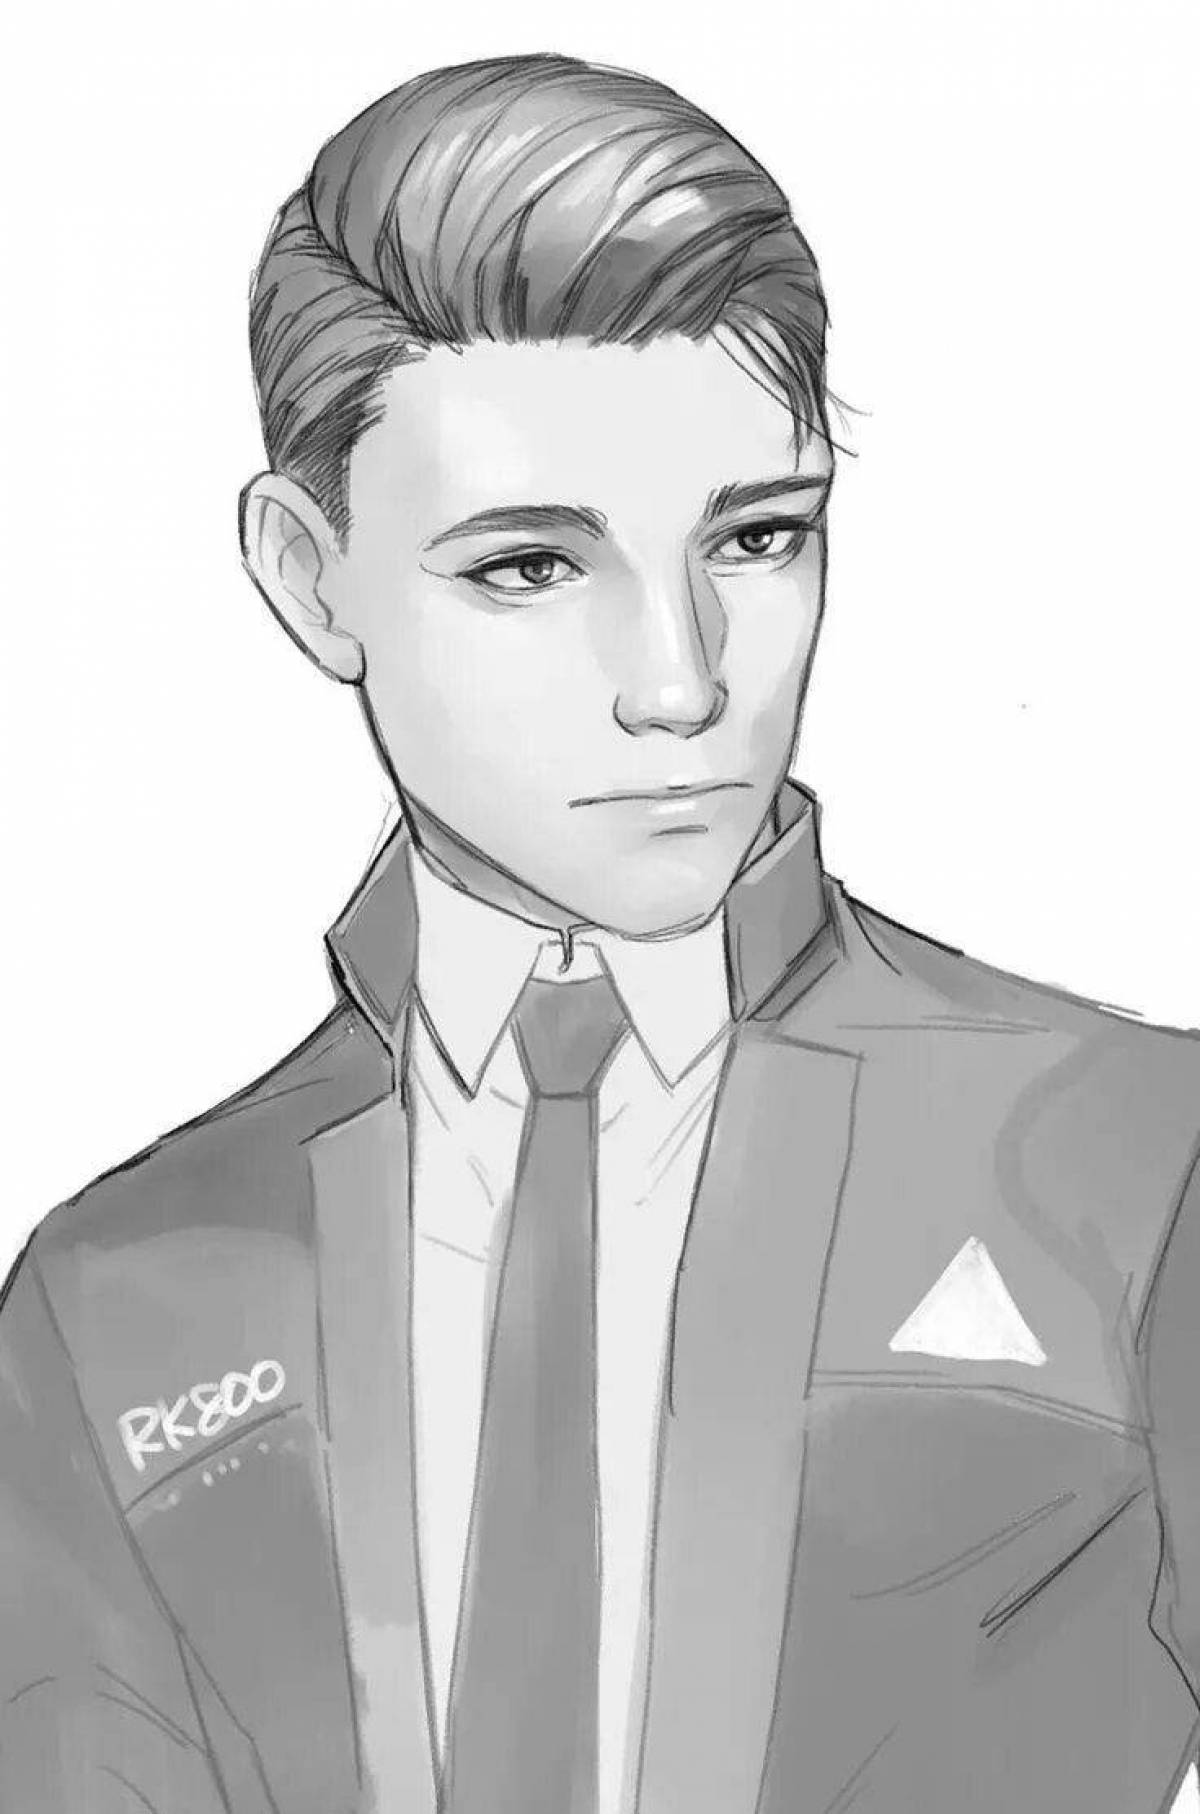 Charming detroit become human coloring book